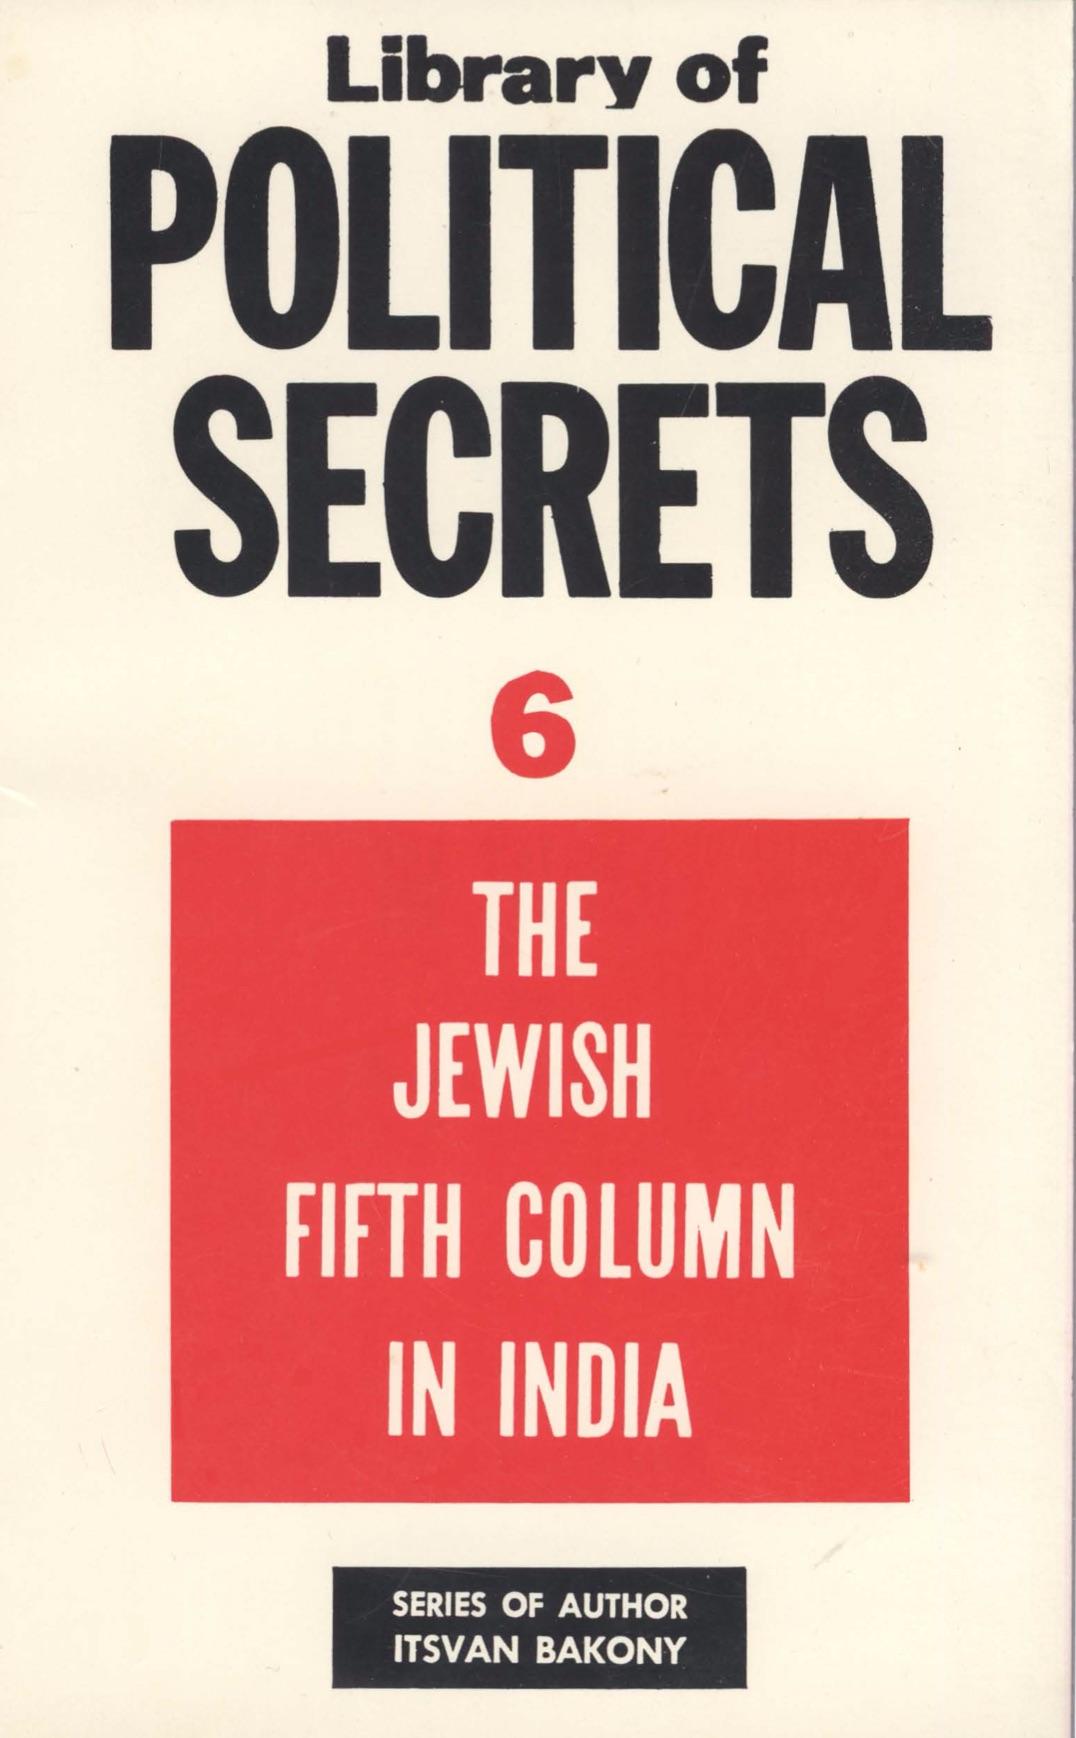 The Jewish Fifth Column in India (1977) by Itsvan Bakony